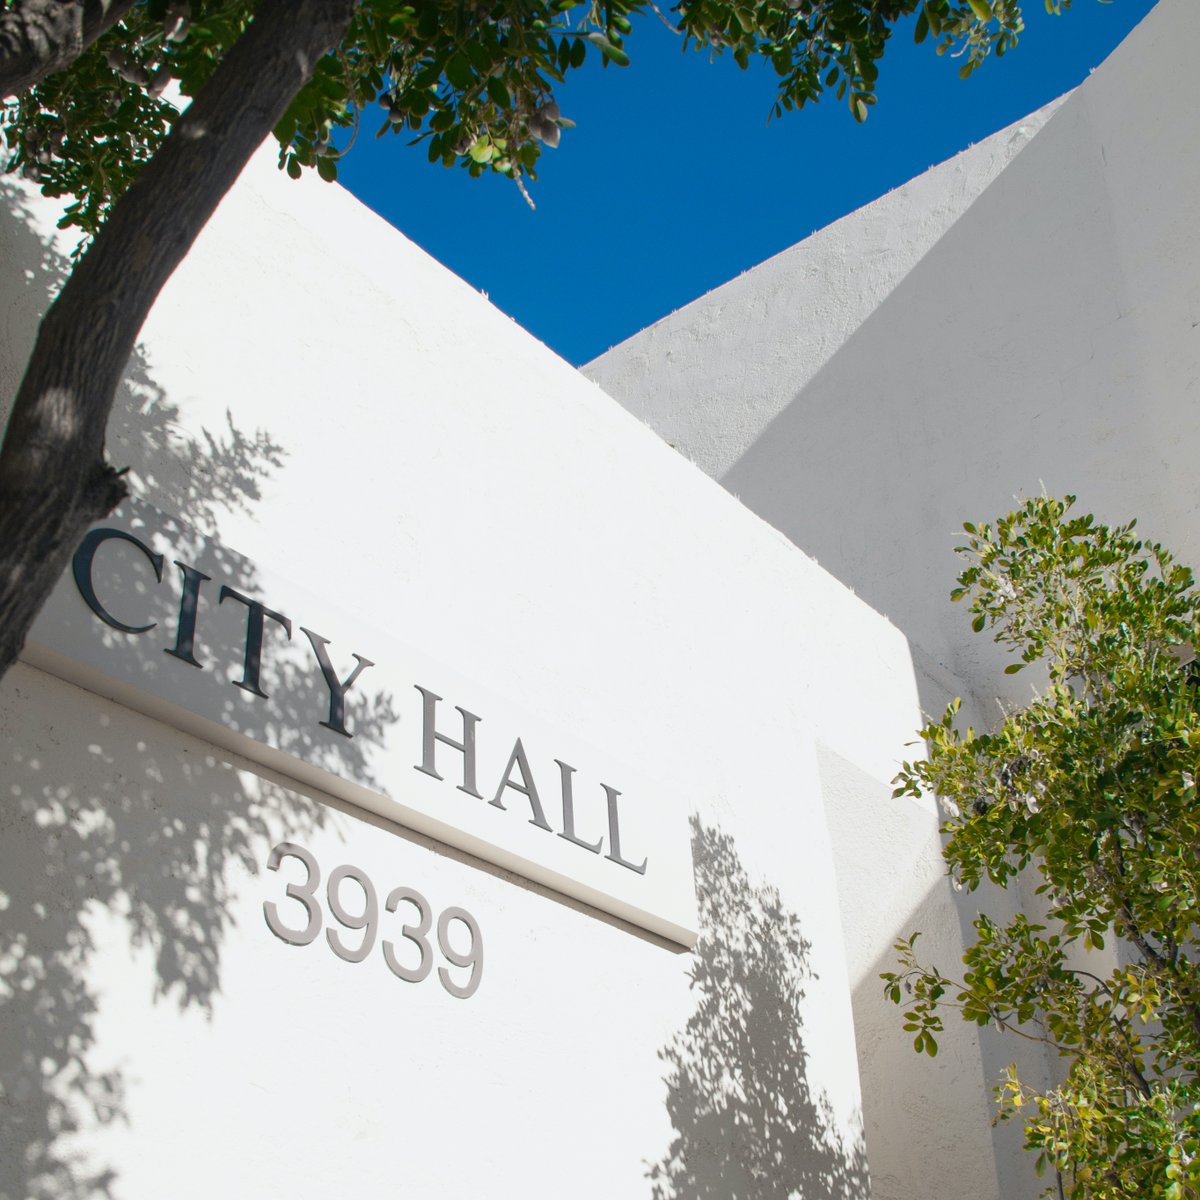 Scottsdale’s proposed Fiscal Year 2024/25 budget and Capital Improvement Plan are ready for your review 📊👀 City Council will discuss the proposals at the April 16 meeting with tentative adoption May 14 and a final budget adoption vote June 4. Learn more: ScottsdaleAZ.gov/news/scottsdal…